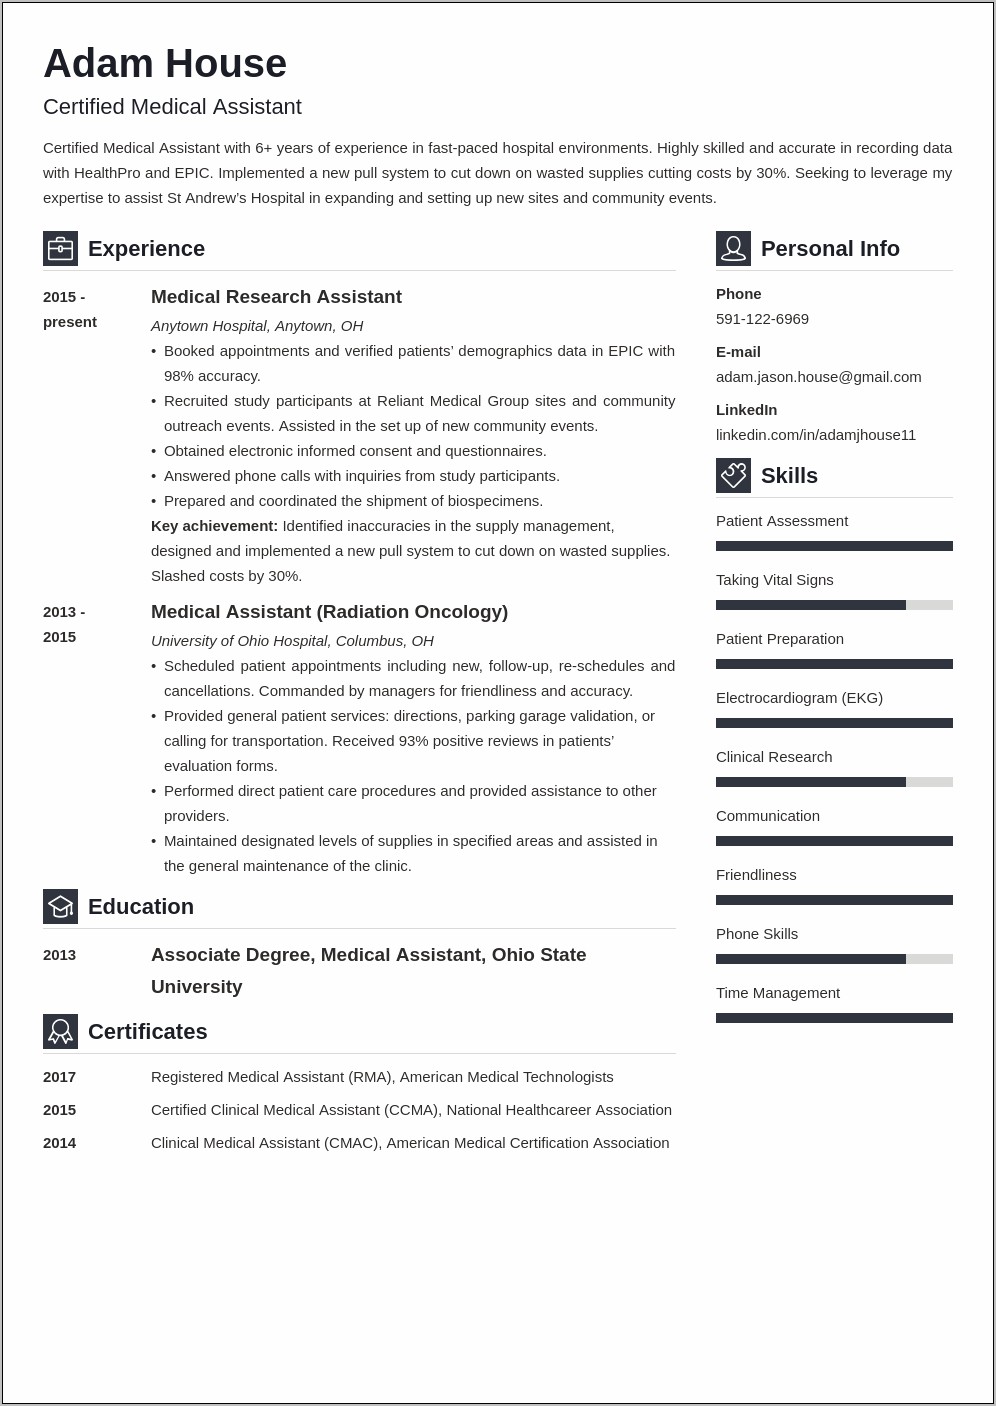 Sample Resume For Medical Assistant With Experience